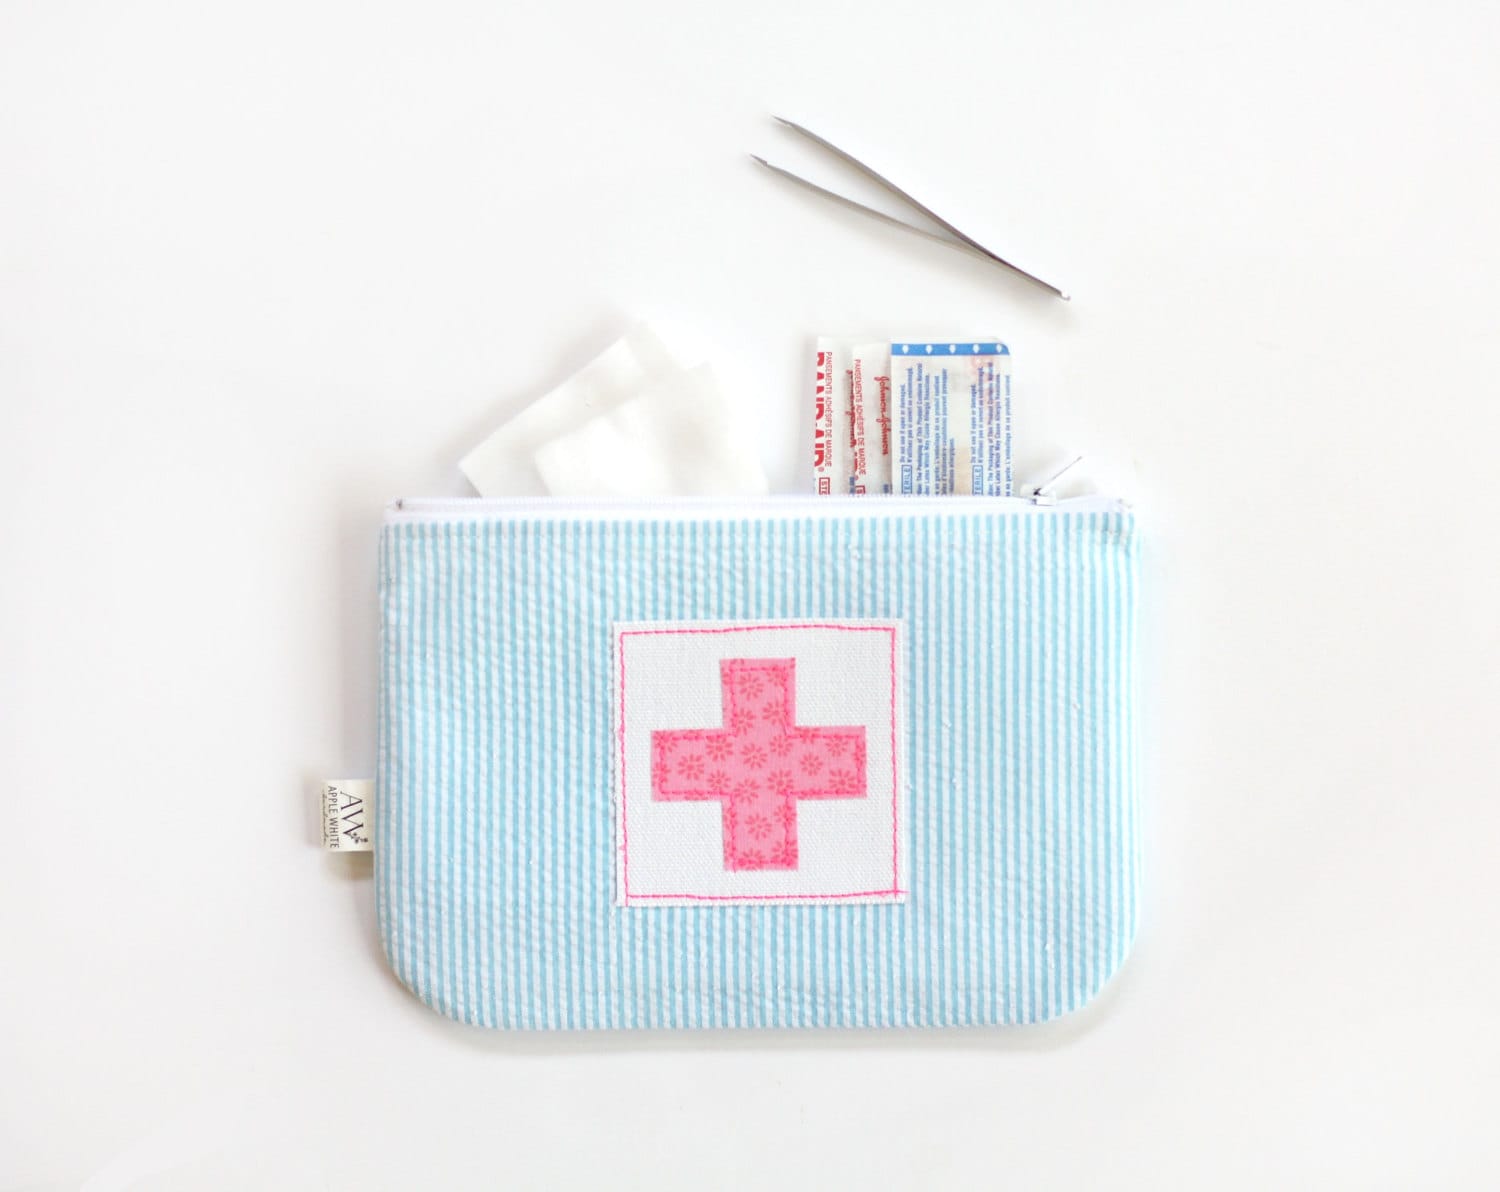 First Aid Kit, Canvas Pouch, Purse First Aid, Swiss Cross, Gift for Friend,  Car, Diaper Bag, Purse, Camper, Camping, RV, Travel Size -  Denmark